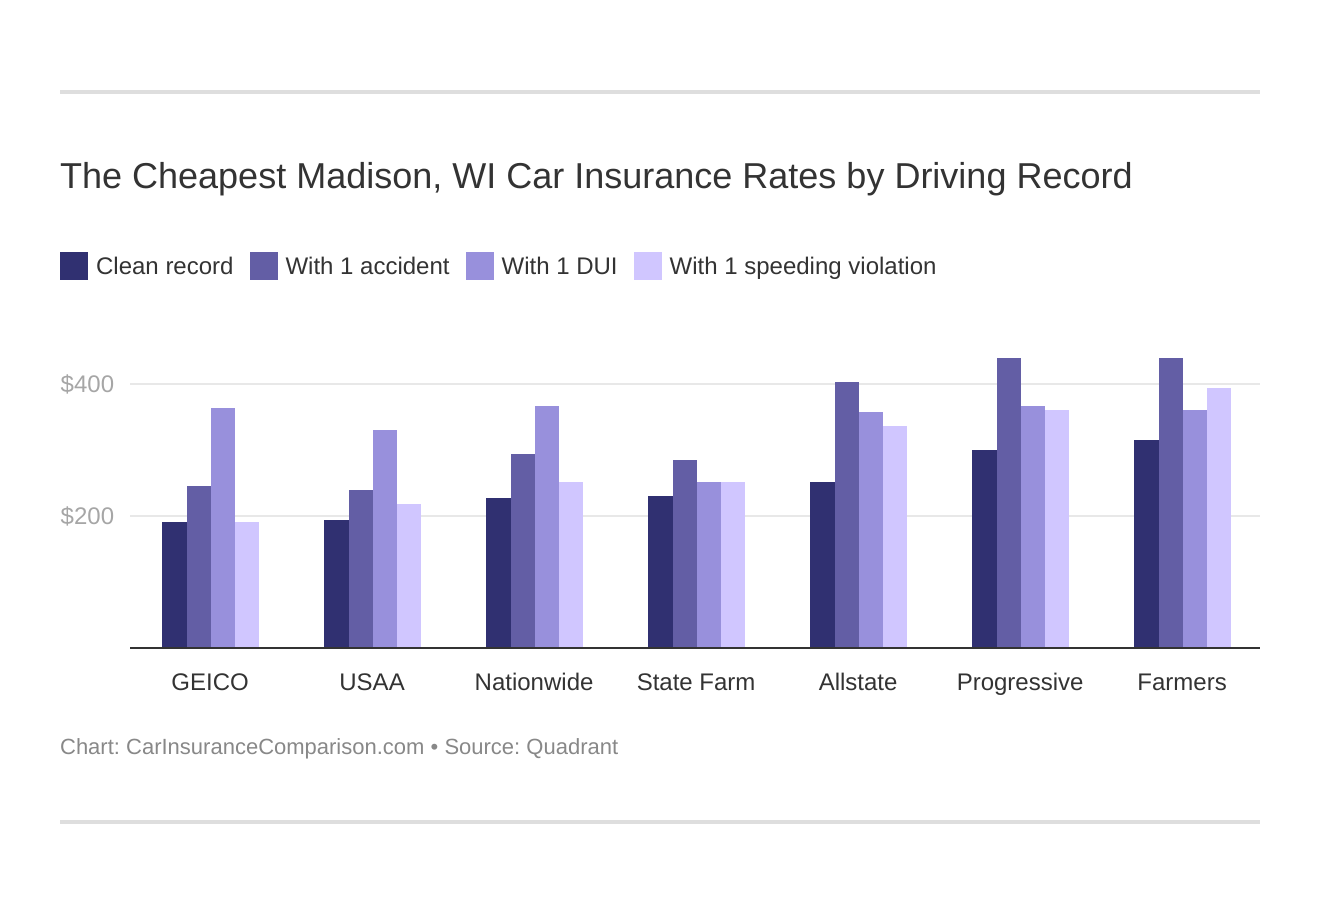 The Cheapest Madison, WI Car Insurance Rates by Driving Record